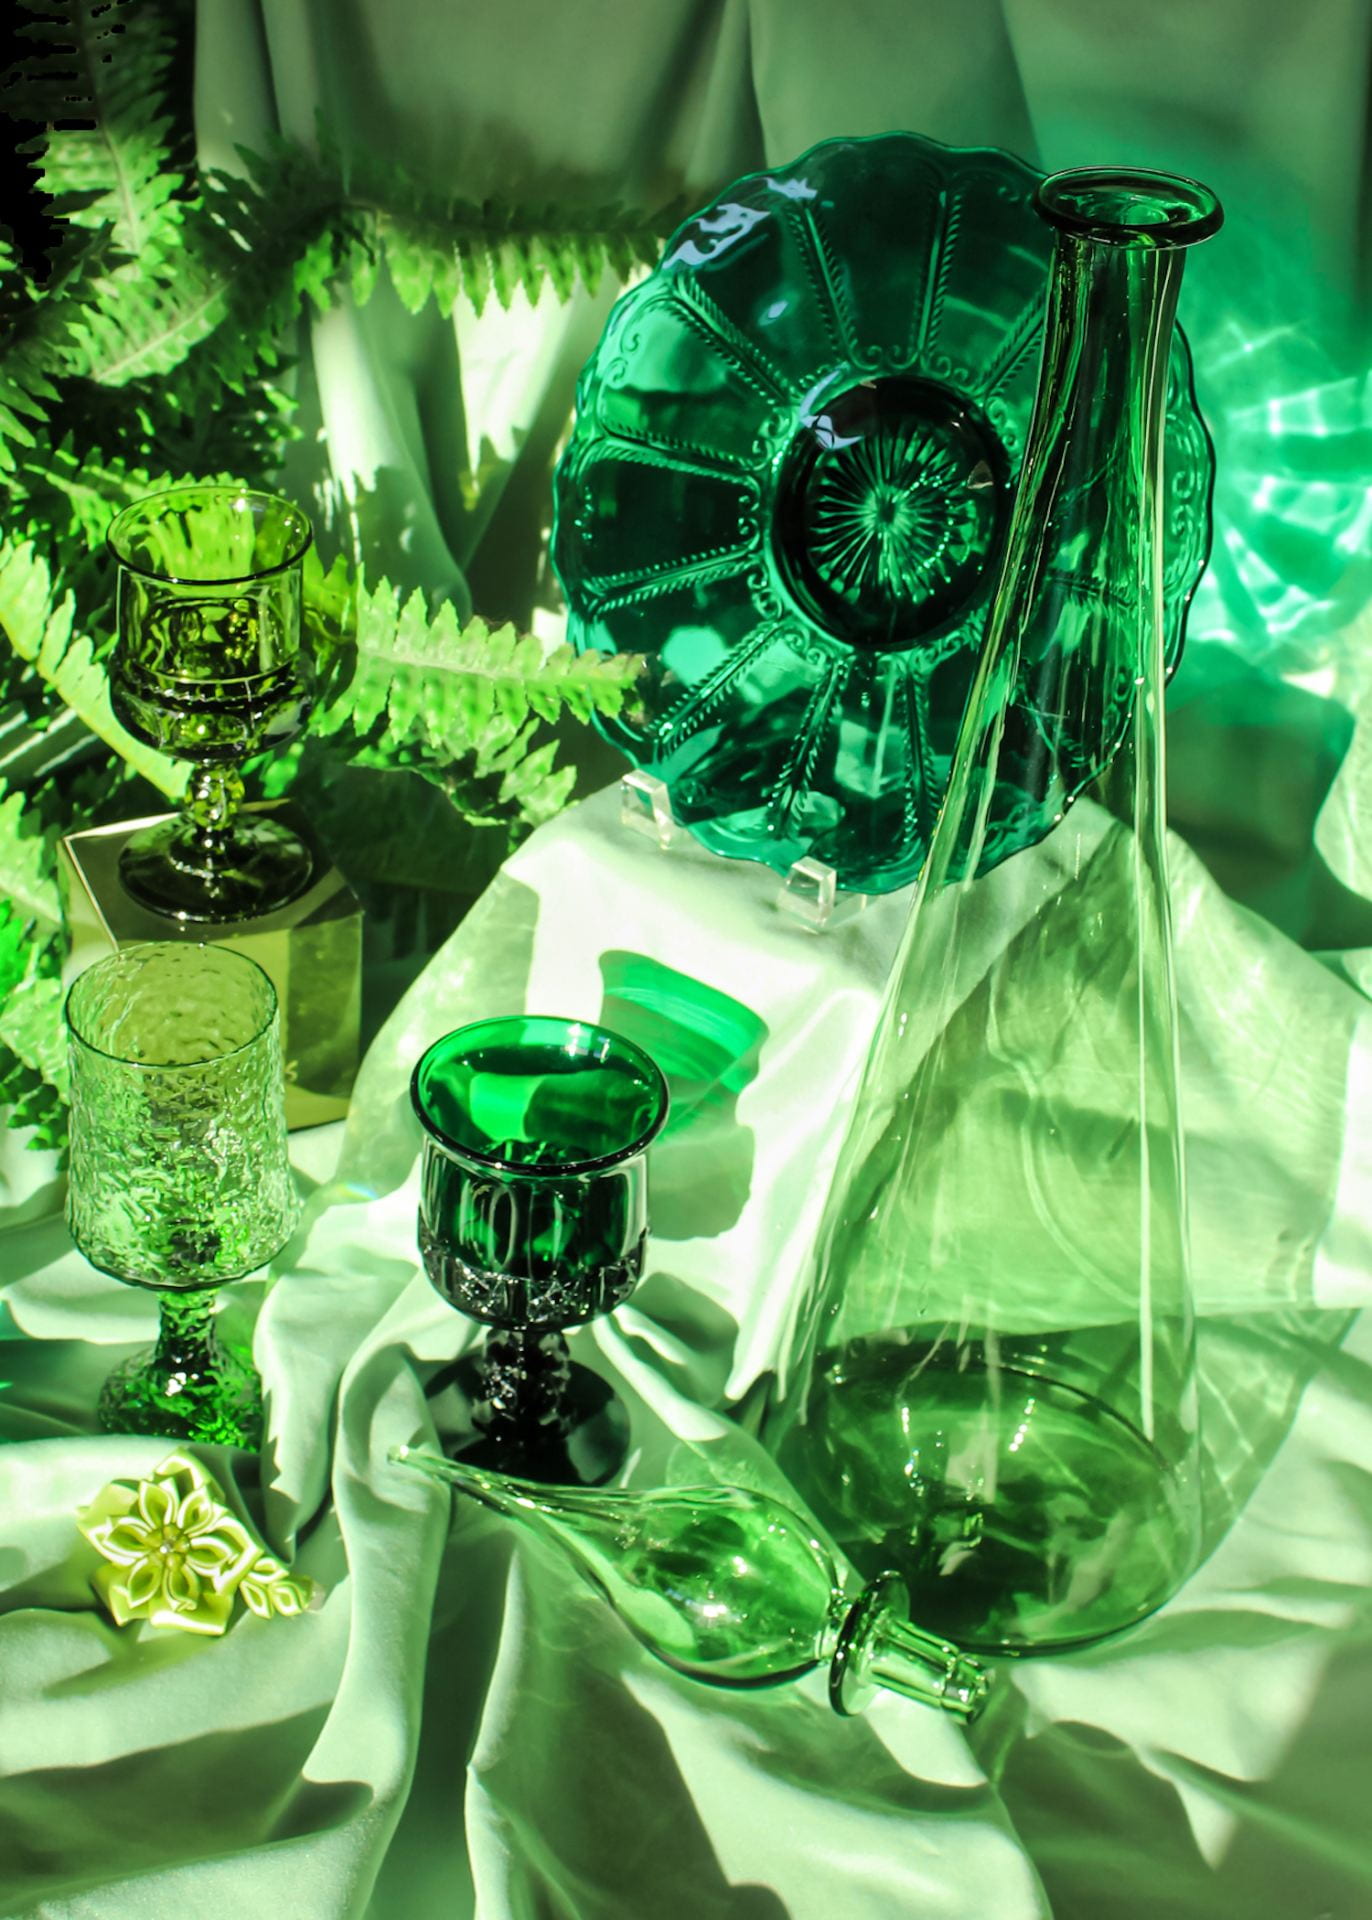 Arranged glass dishes and vases cast in bright green light